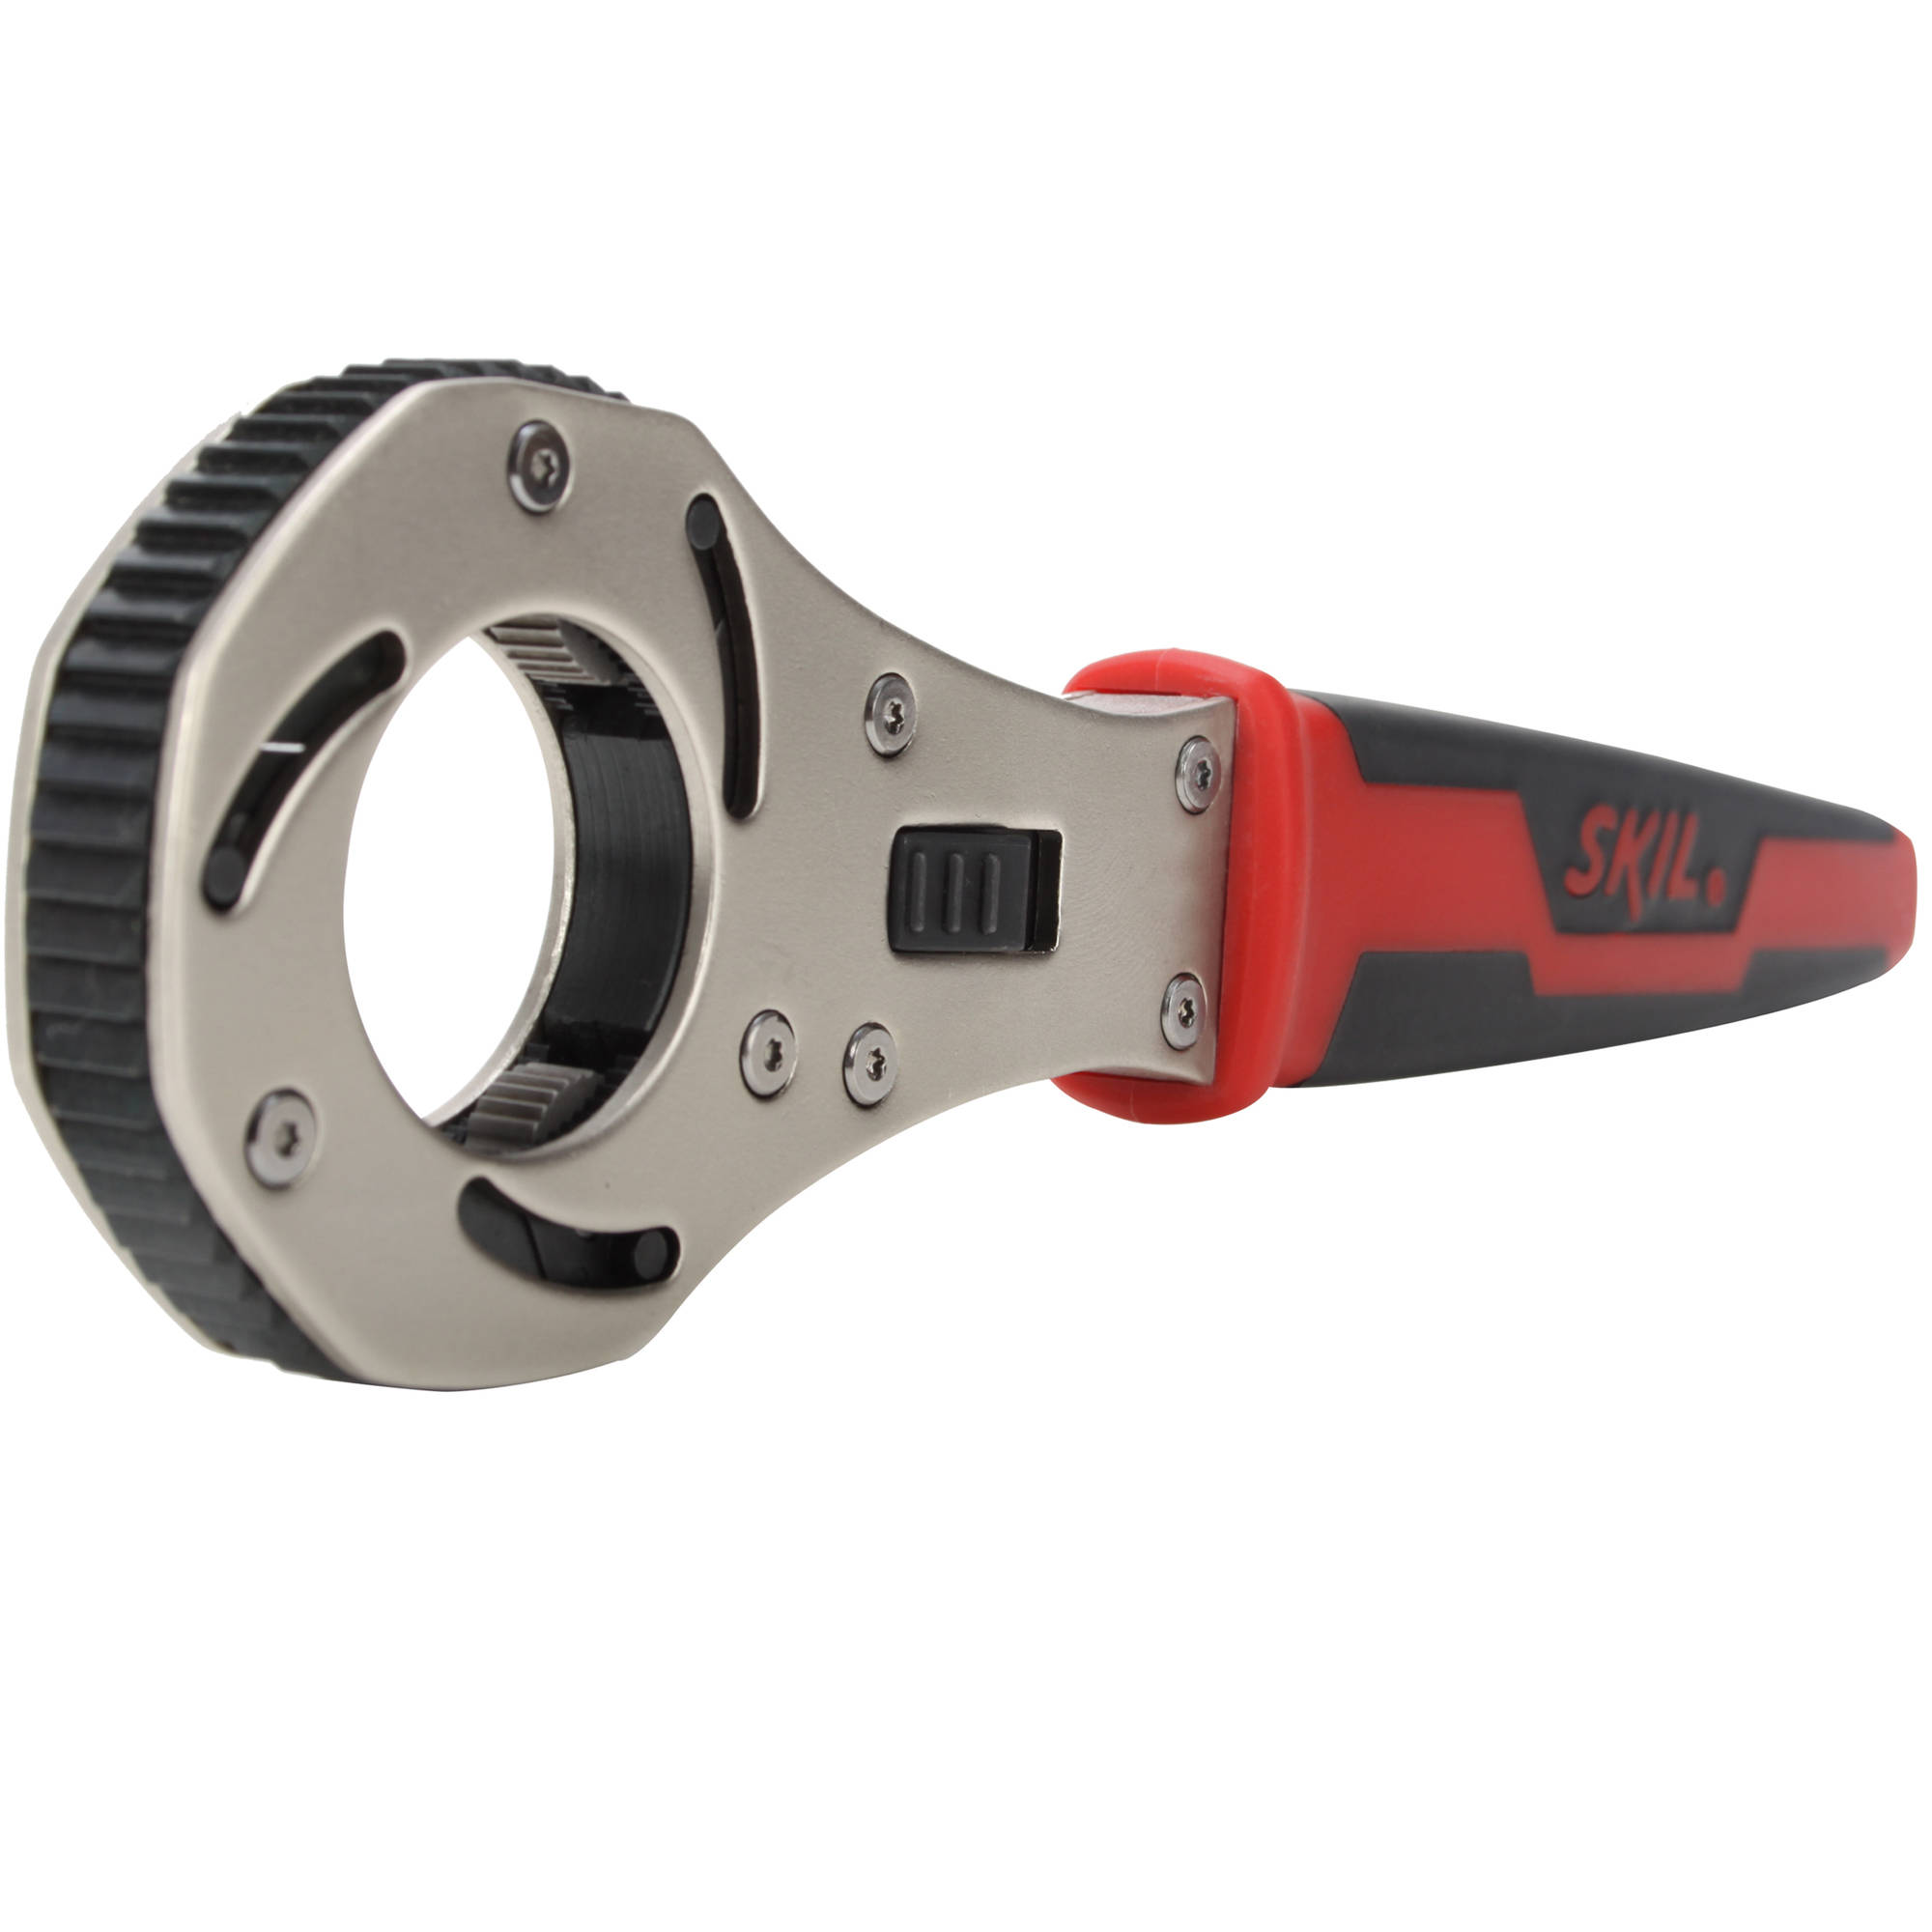 Skil tri driver ratcheting wrench for $5